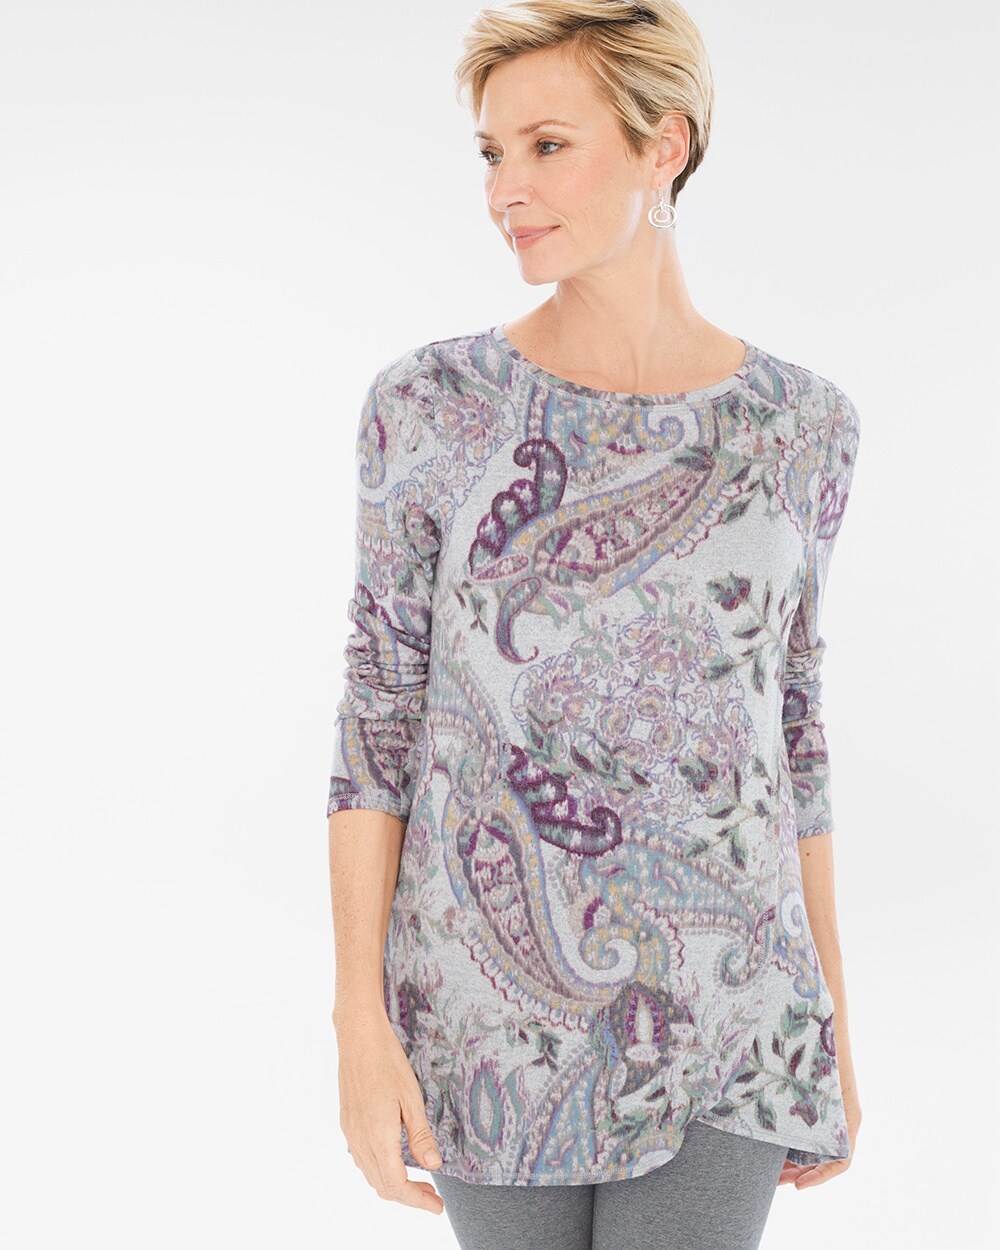 Zenergy Knit Collection Cozy Printed Wrap-Front Tunic